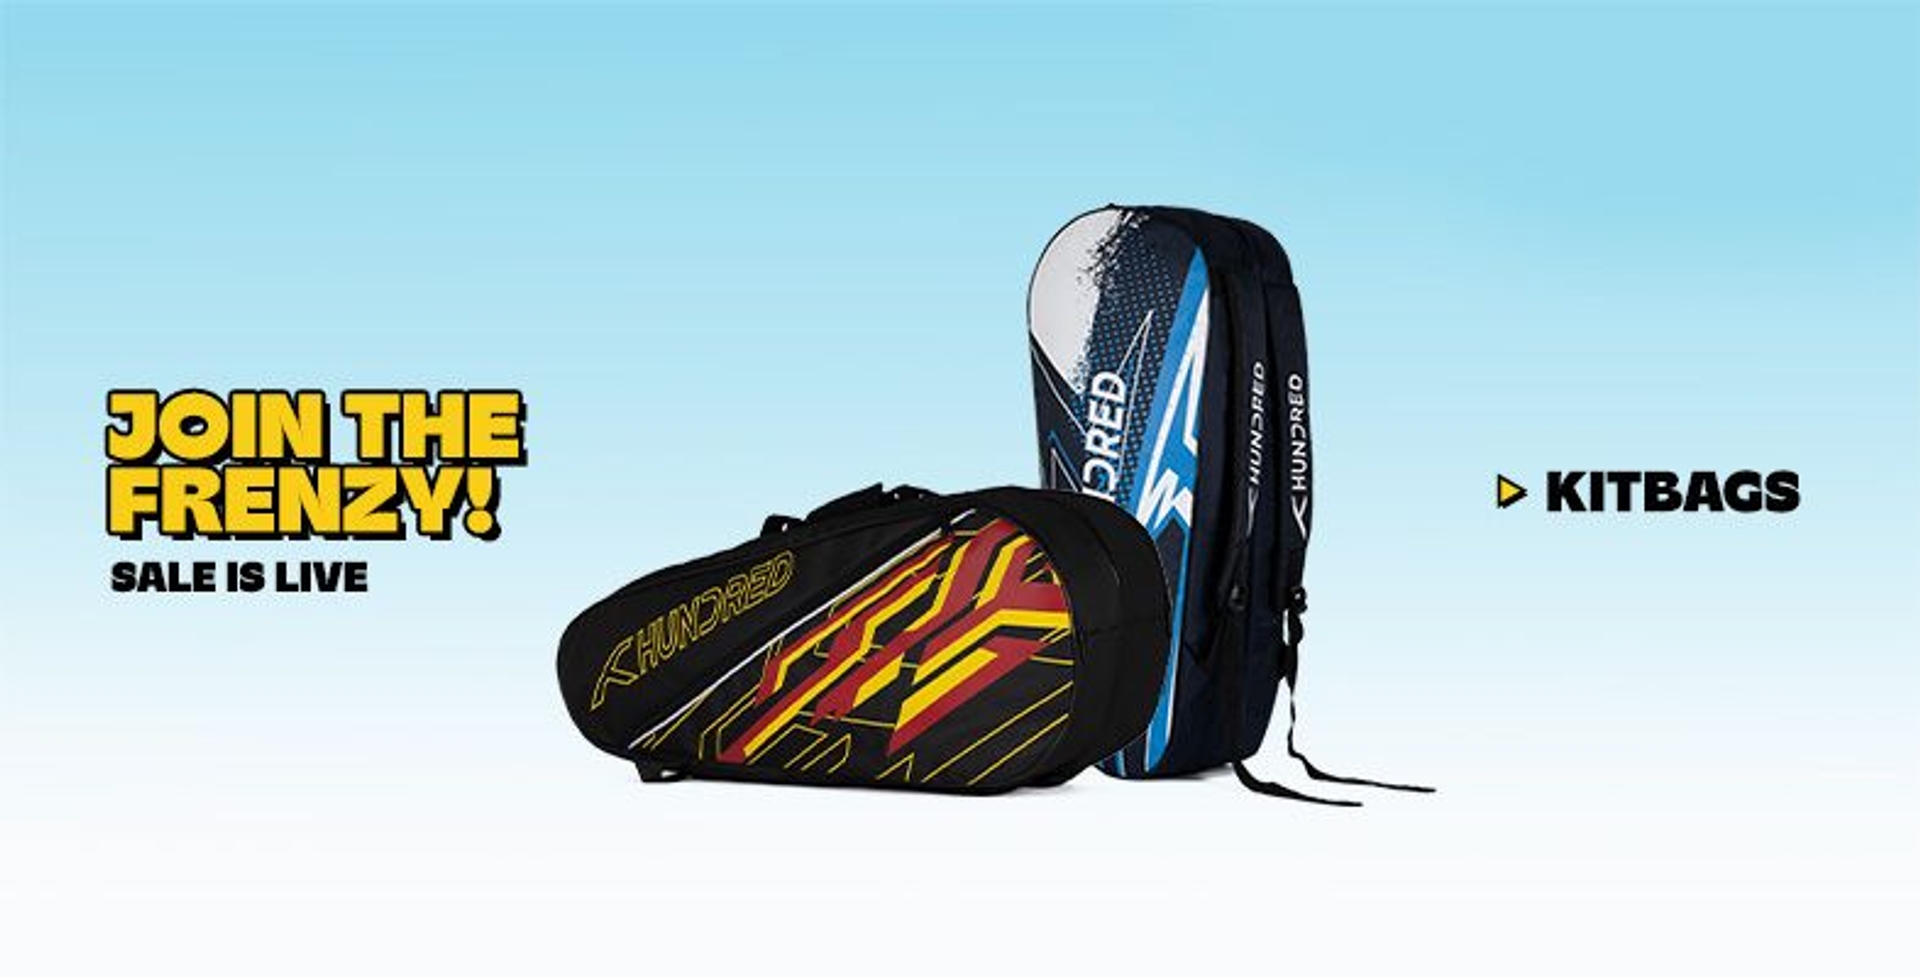 Best Deals on Kitbags